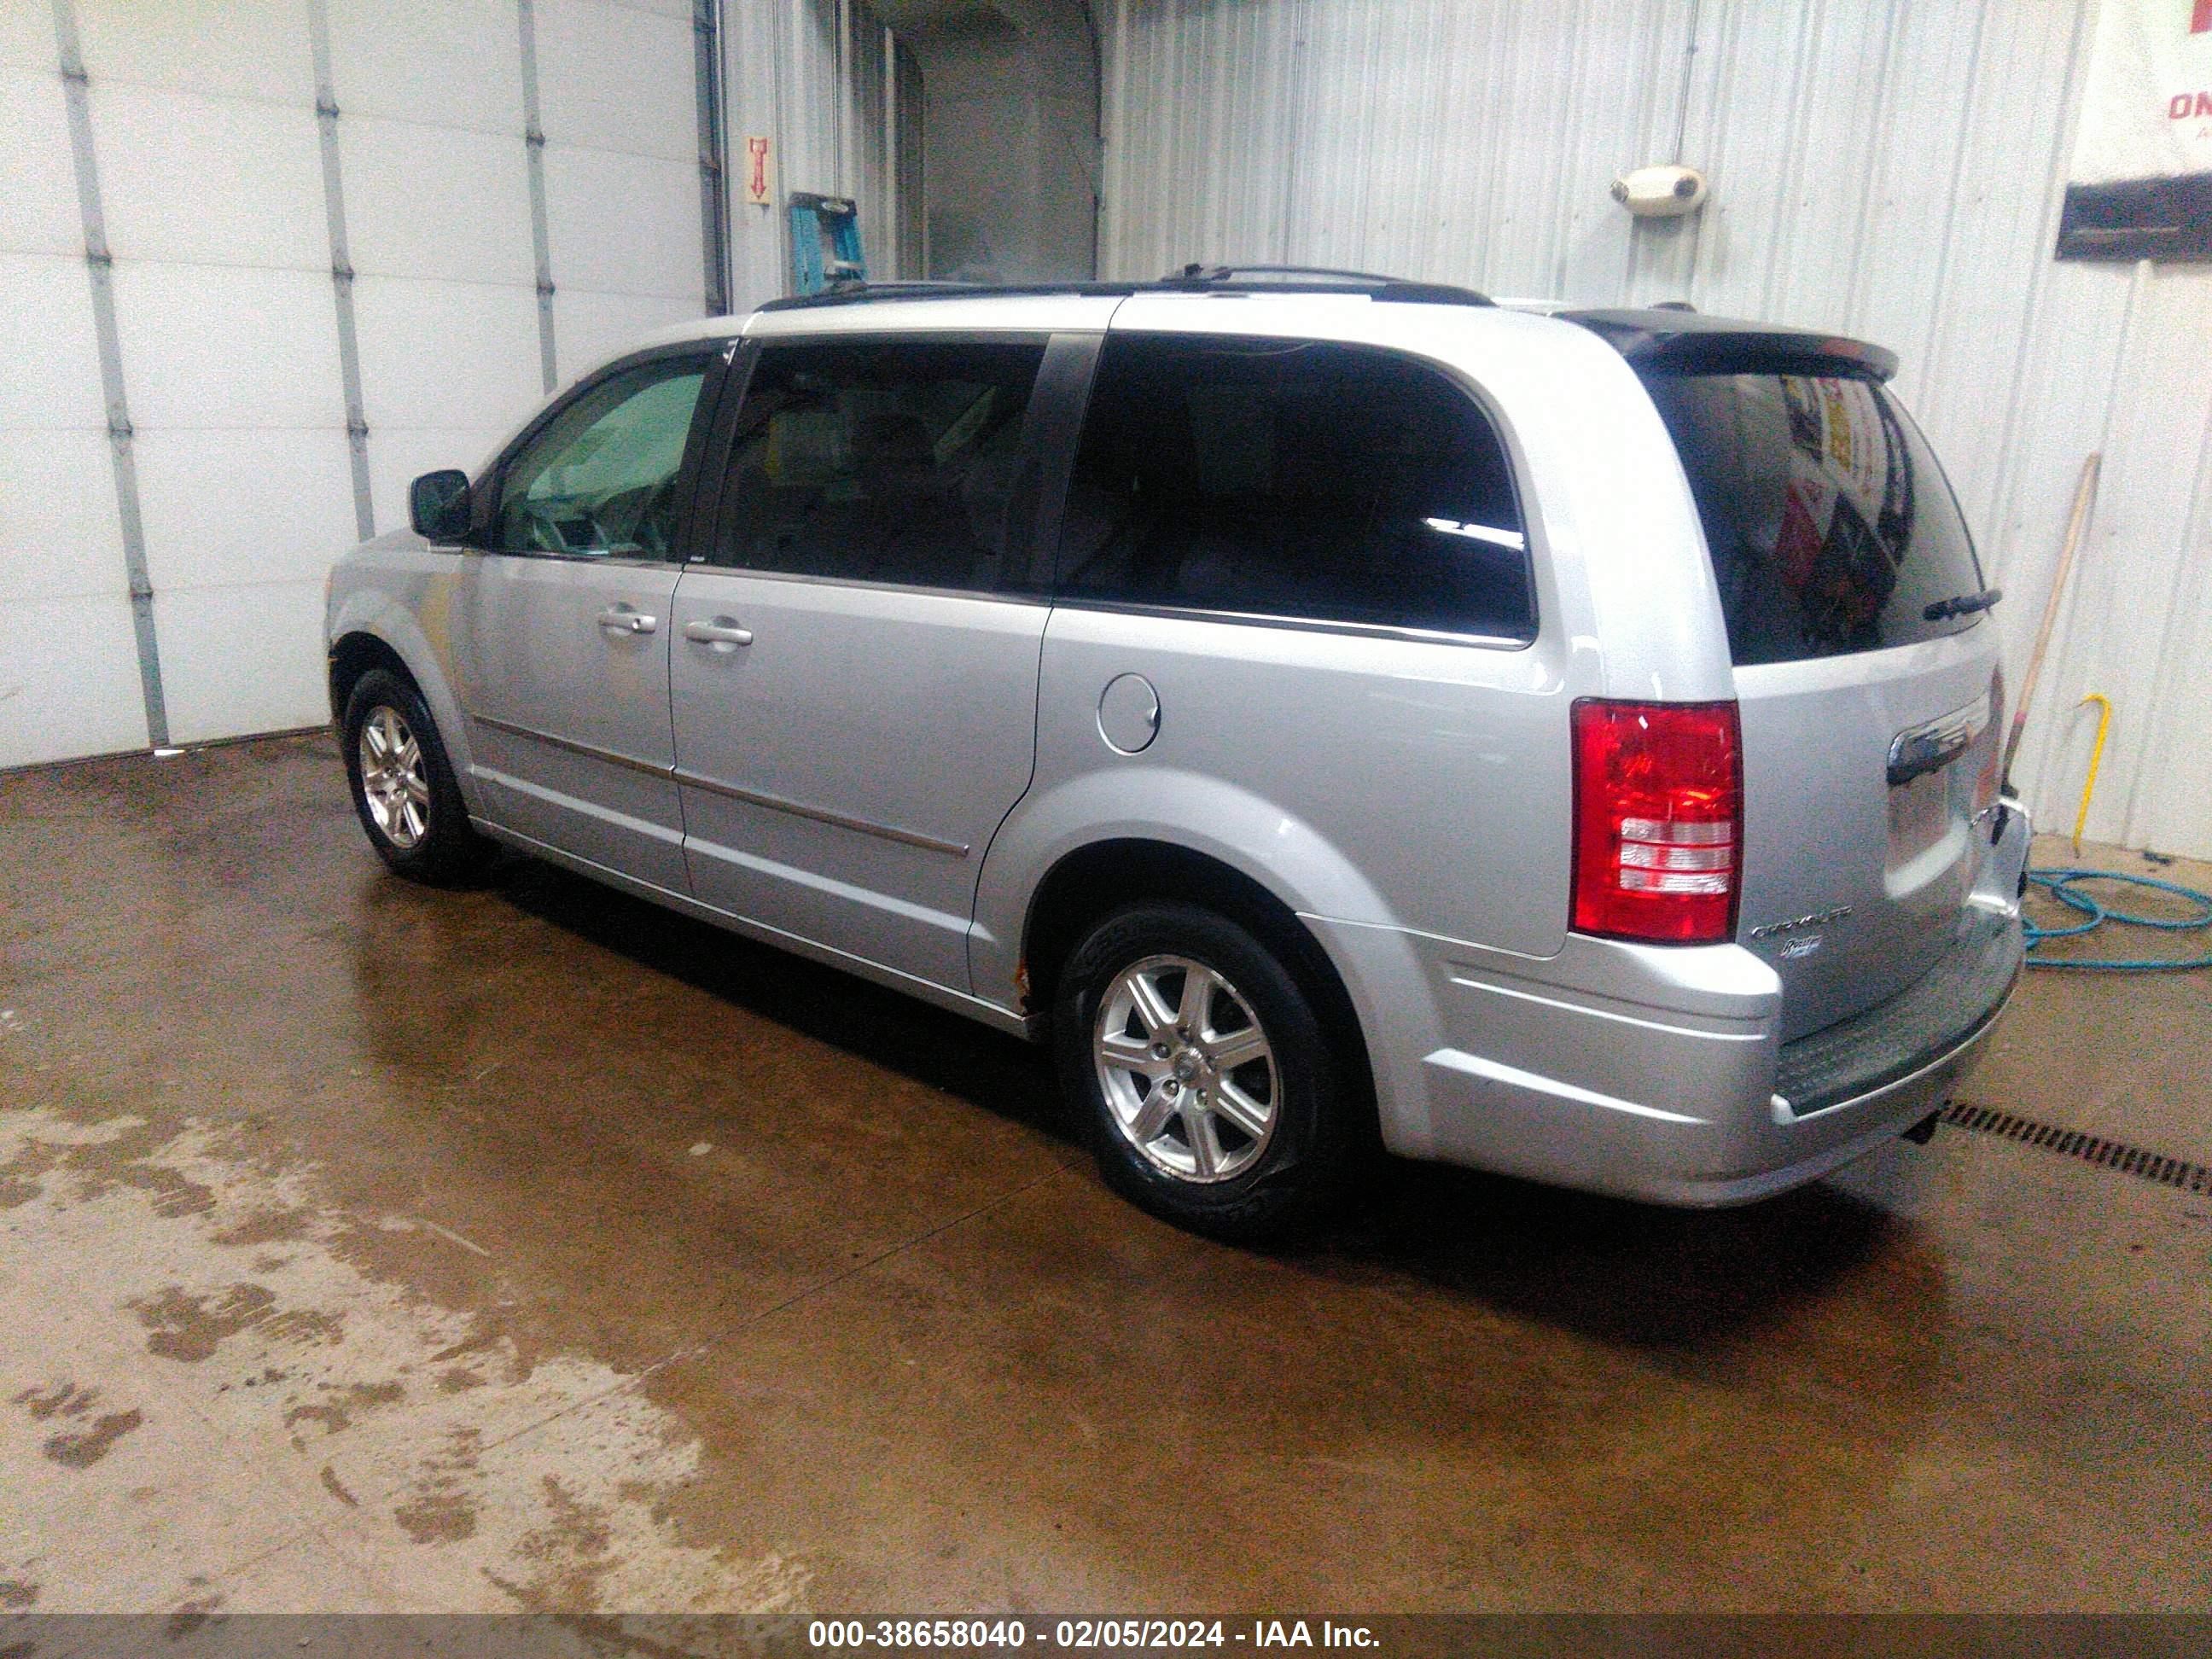 Photo 2 VIN: 2A8HR54109R630671 - CHRYSLER TOWN & COUNTRY 